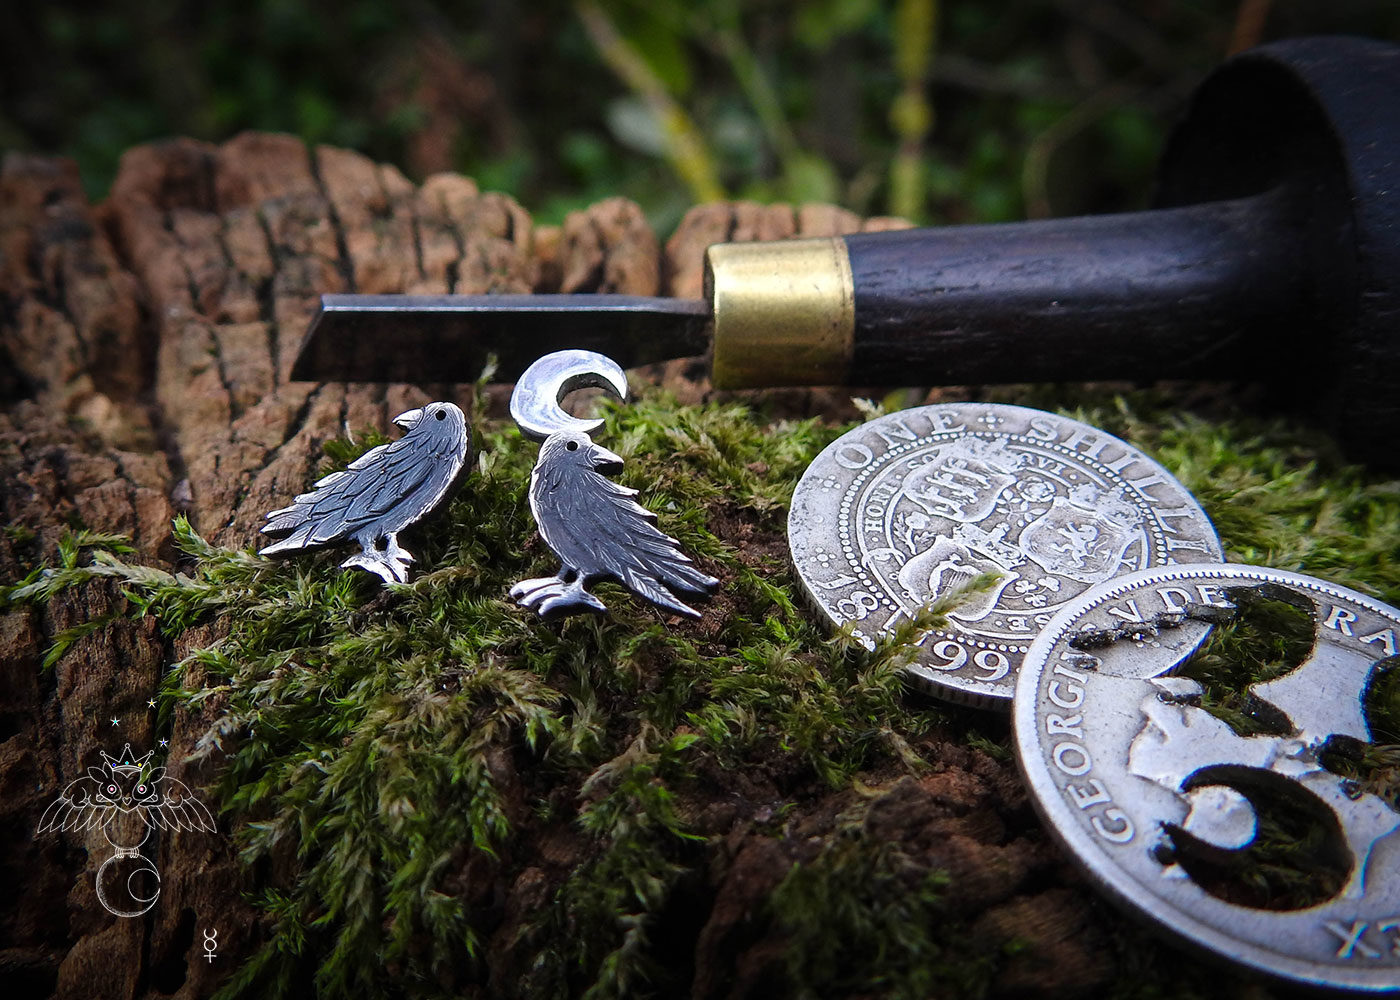 Raven earrings - handmade and recycled sterling silver shilling coin.